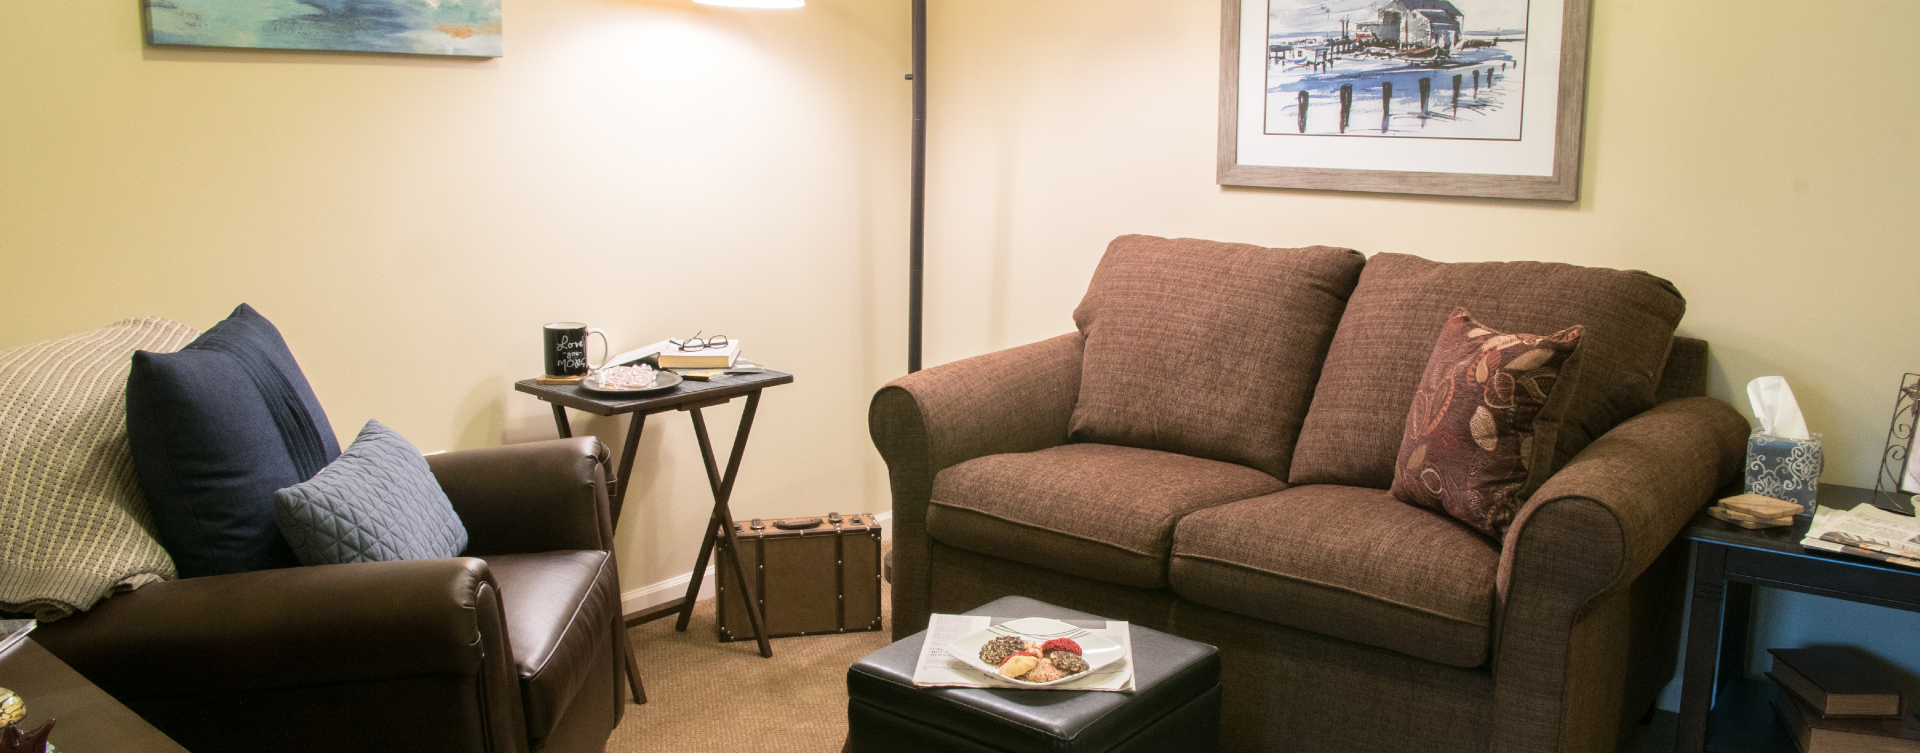 Get a new lease on life with a cozy apartment at Bickford of Spotsylvania